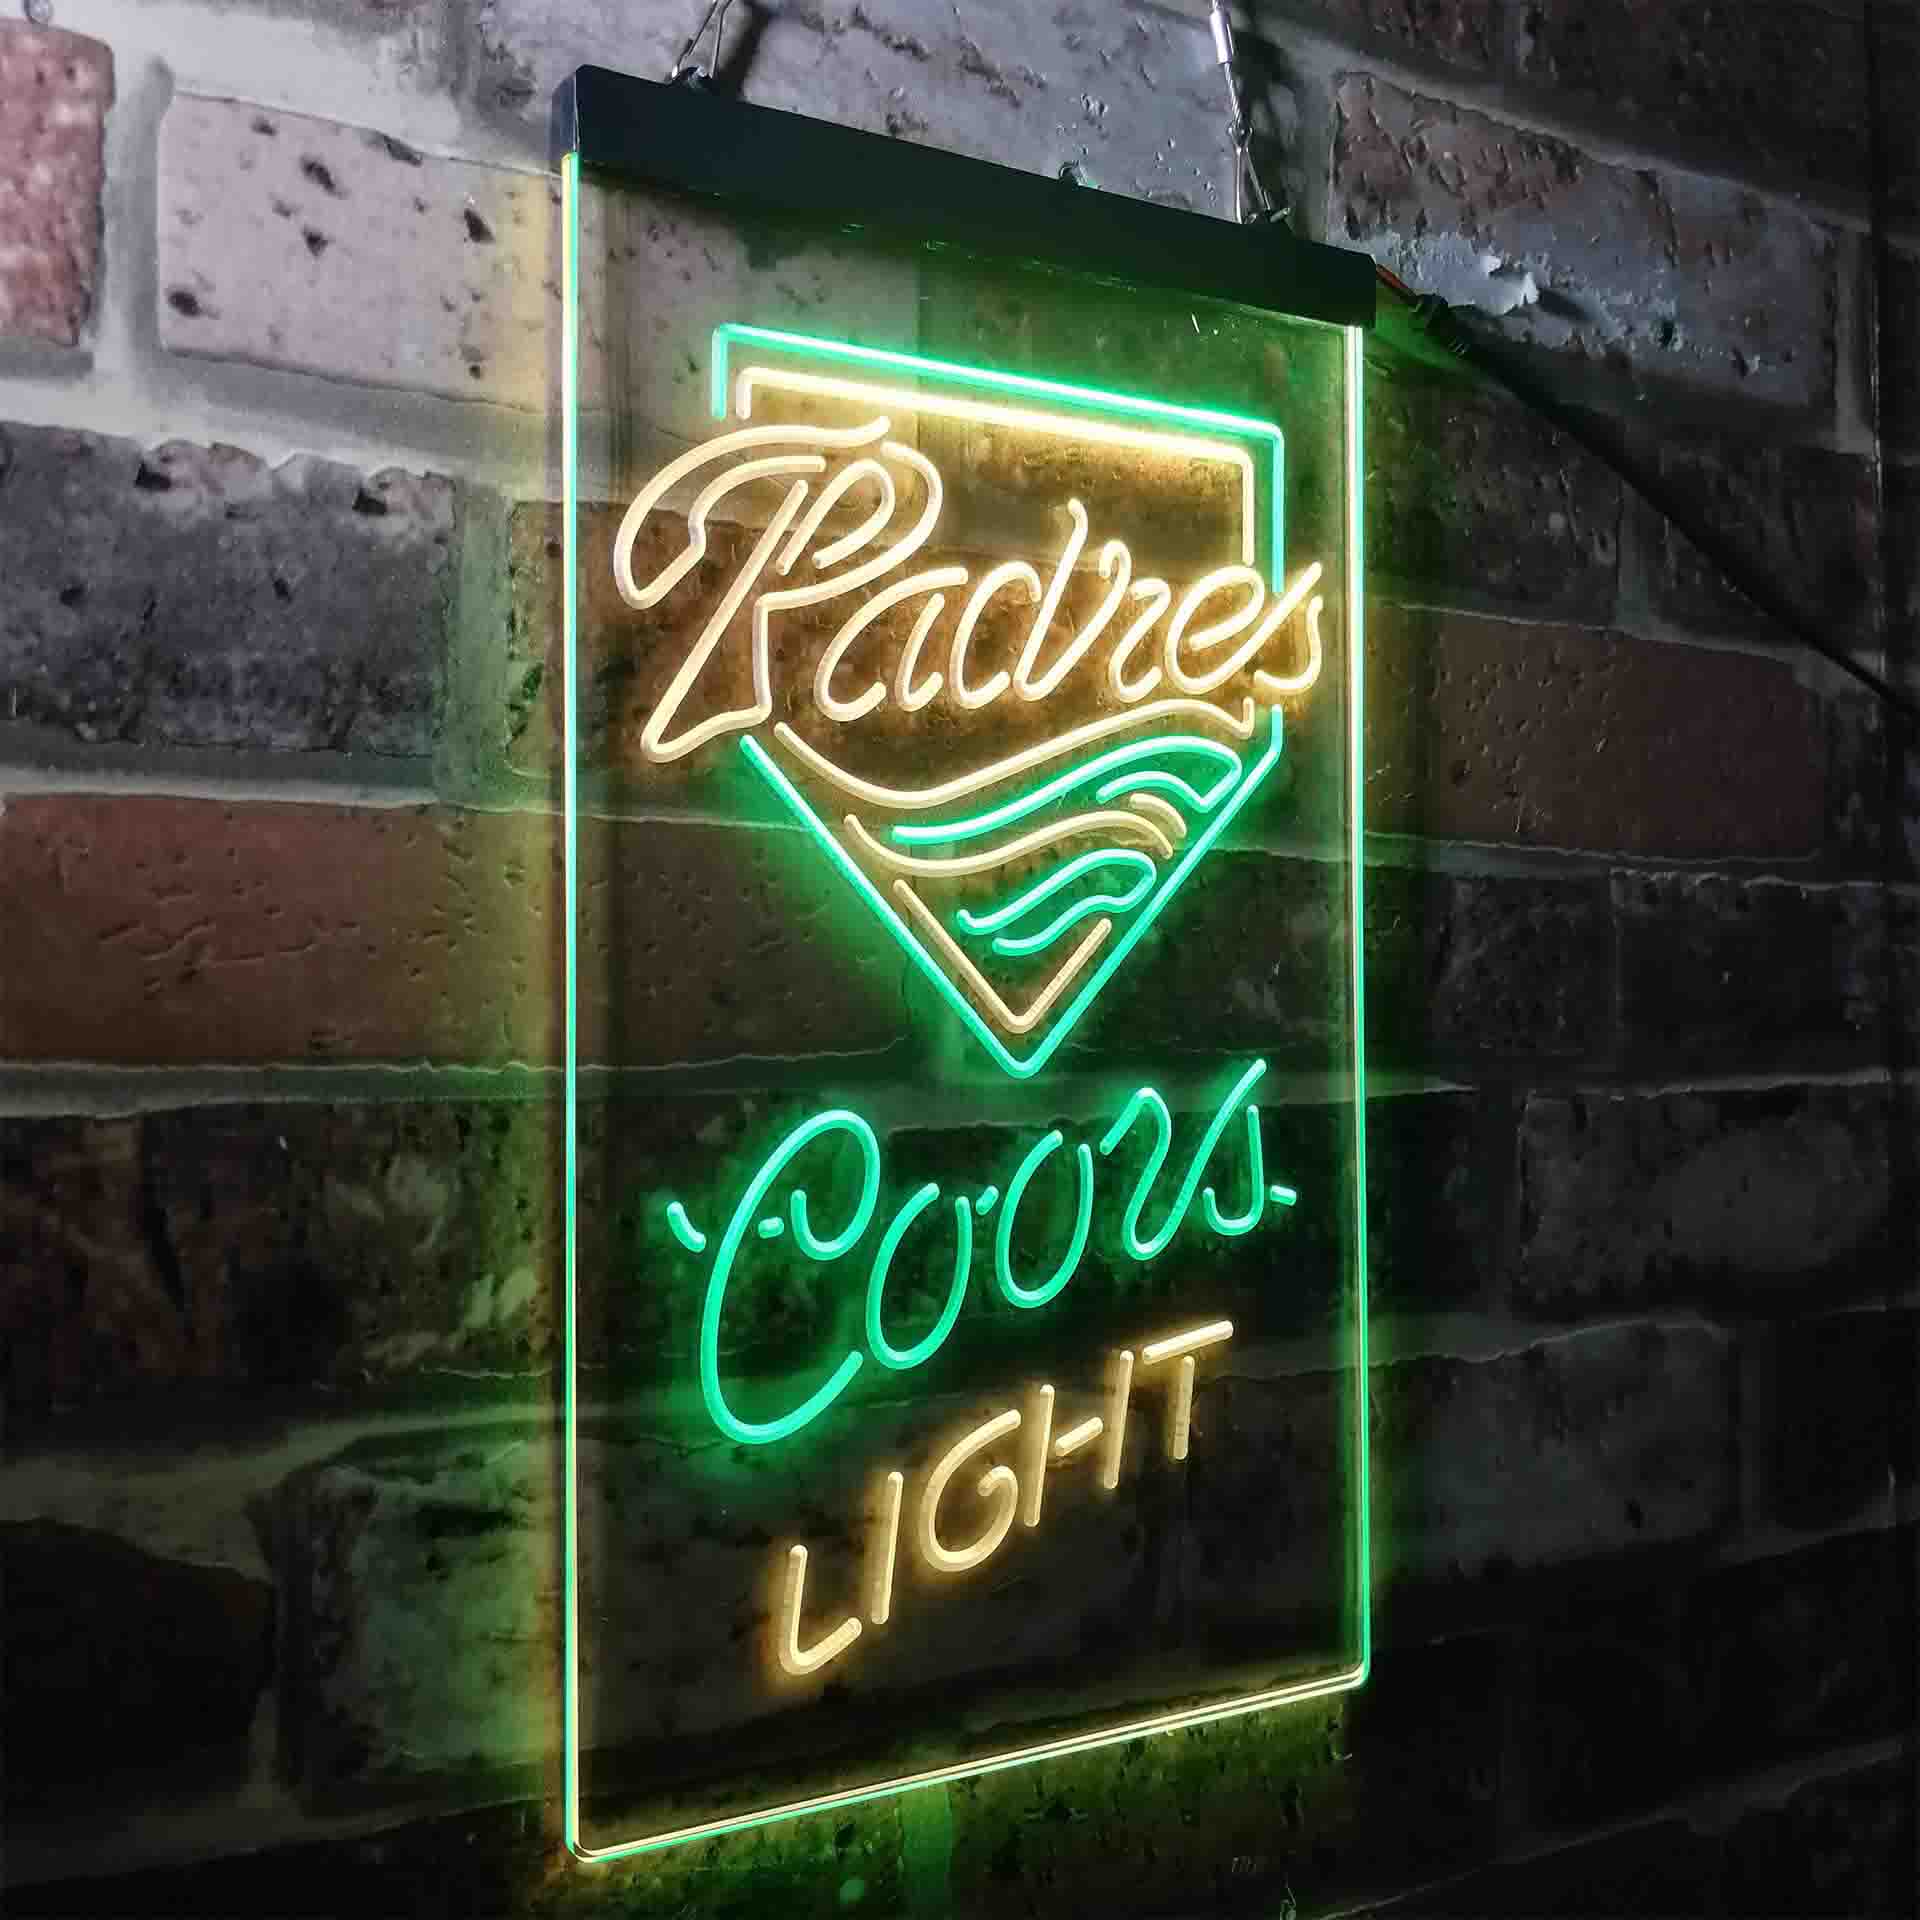 San Diego Padres Coors Light Neon-Like LED Sign